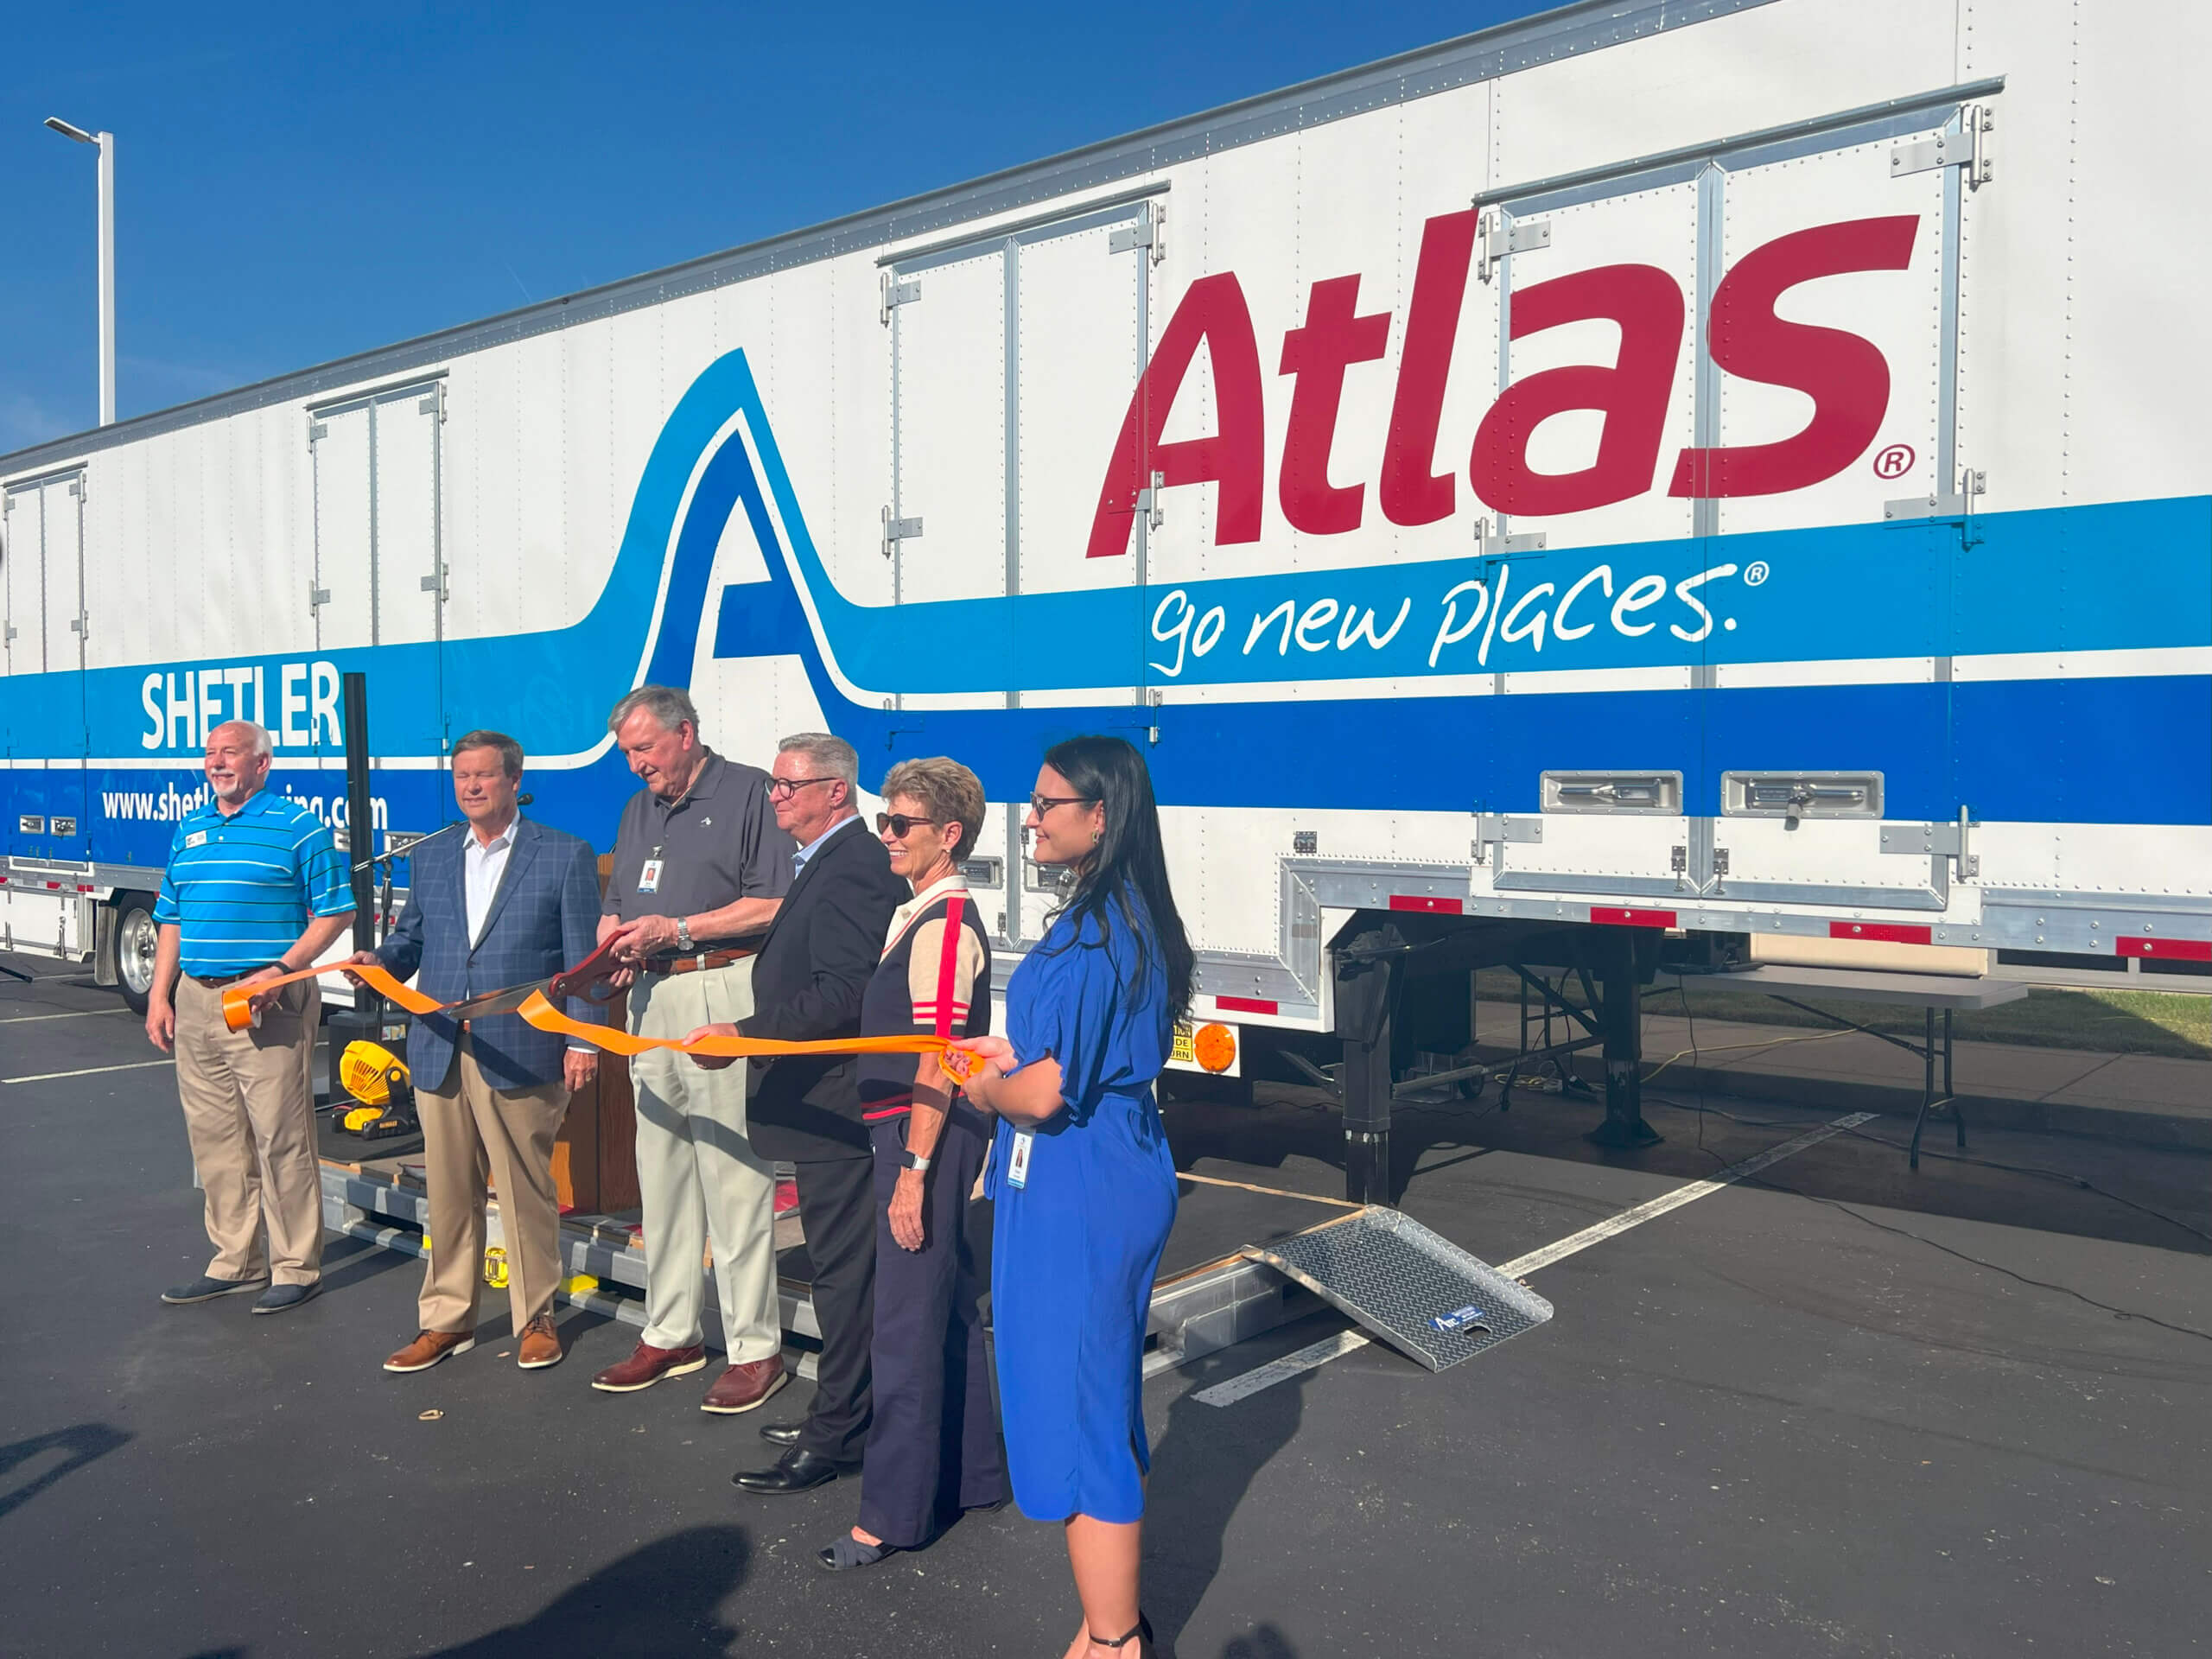 Atlas® World Group Celebrates 75 Years Of Going New Places®